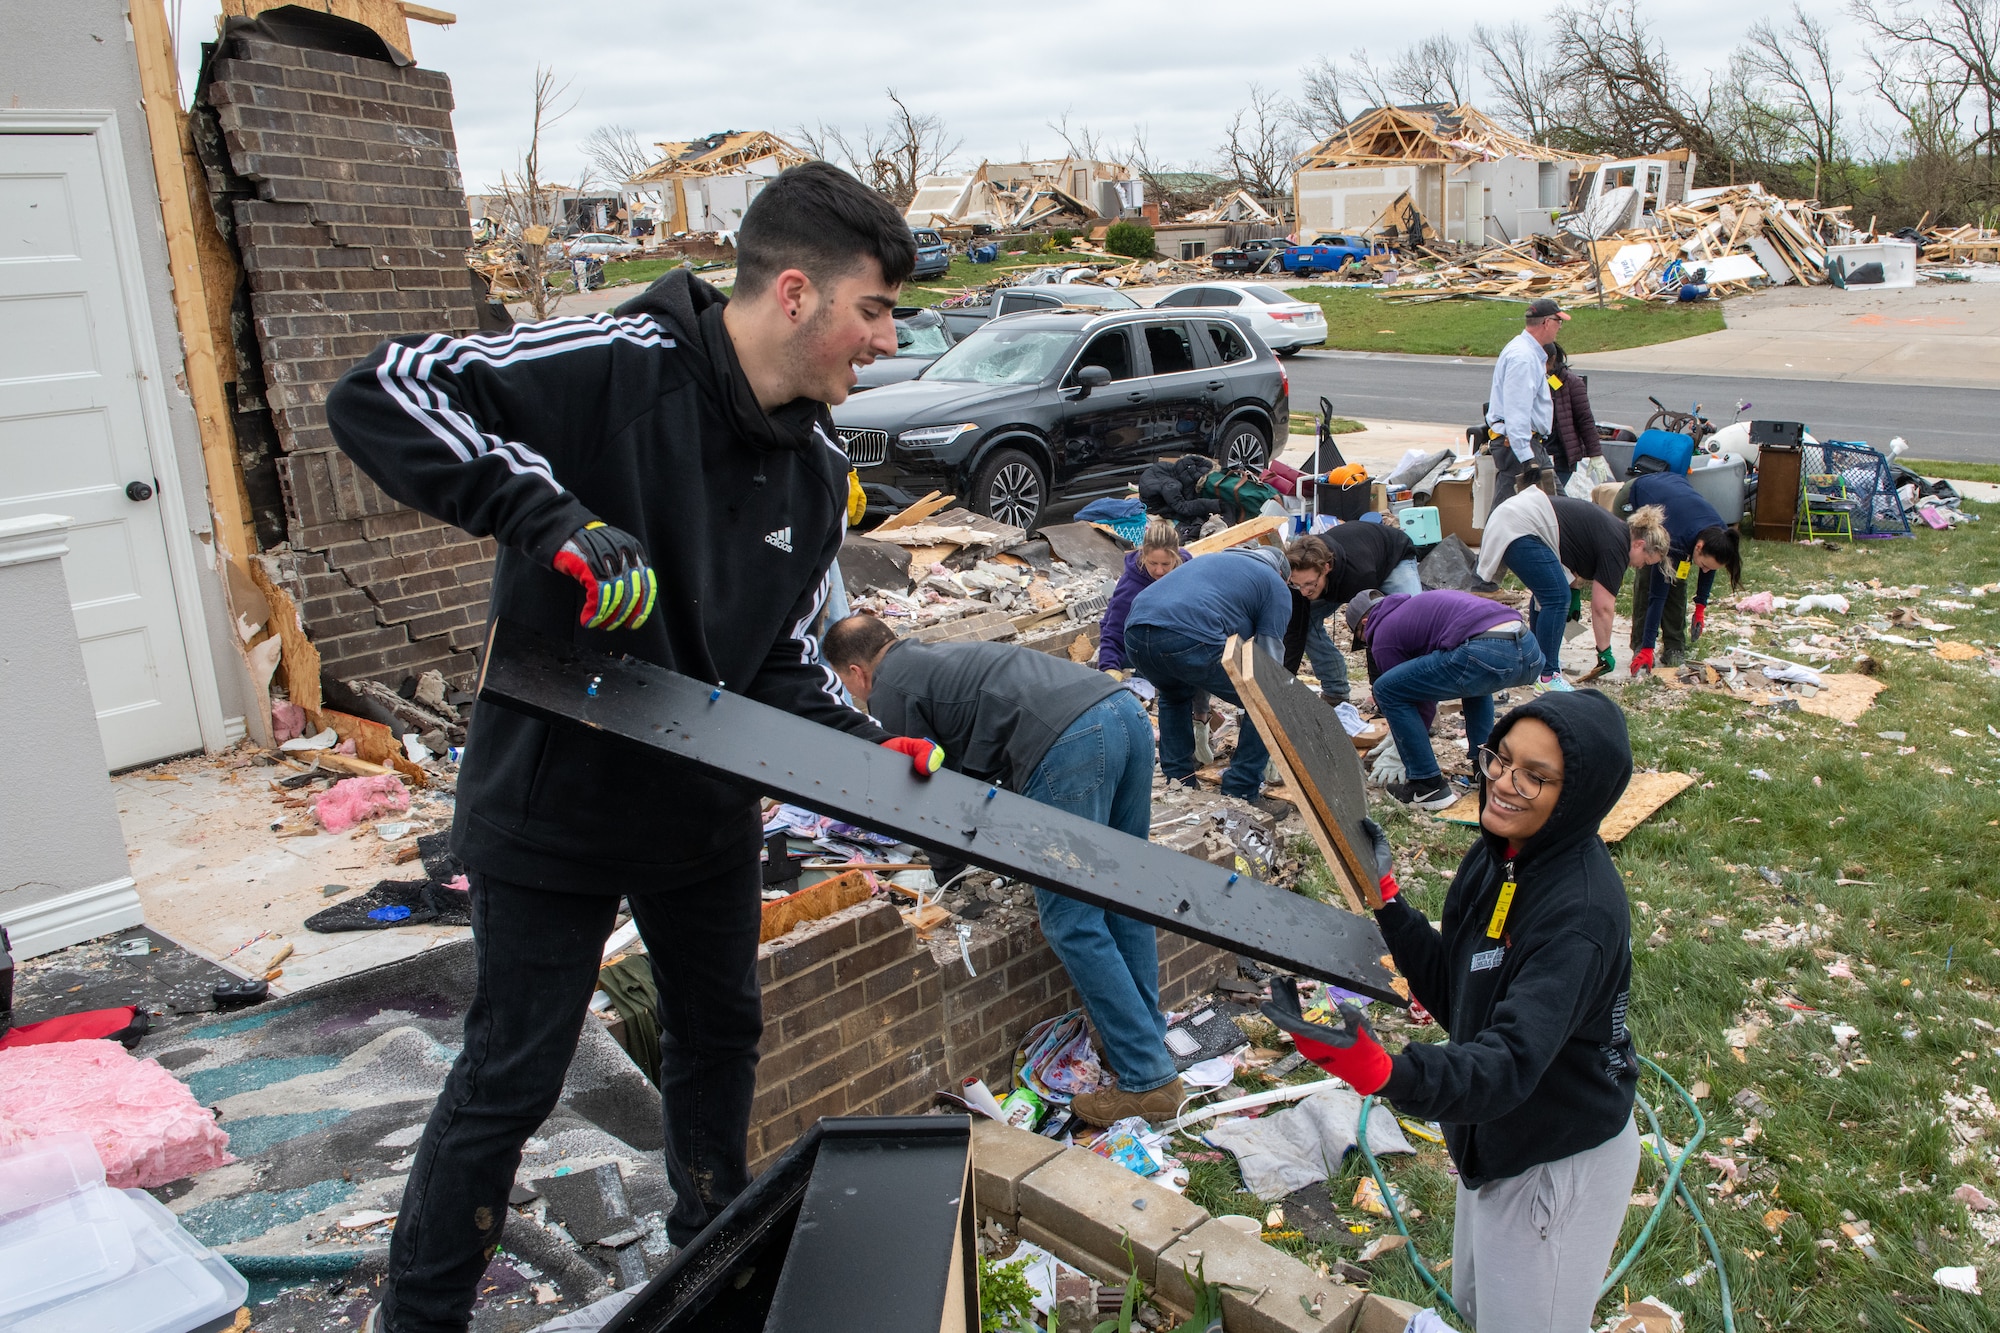 Airmen and volunteers from local communities sort personal belongings from the debris of a military family’s home that was destroyed during a tornado May 03, 2022